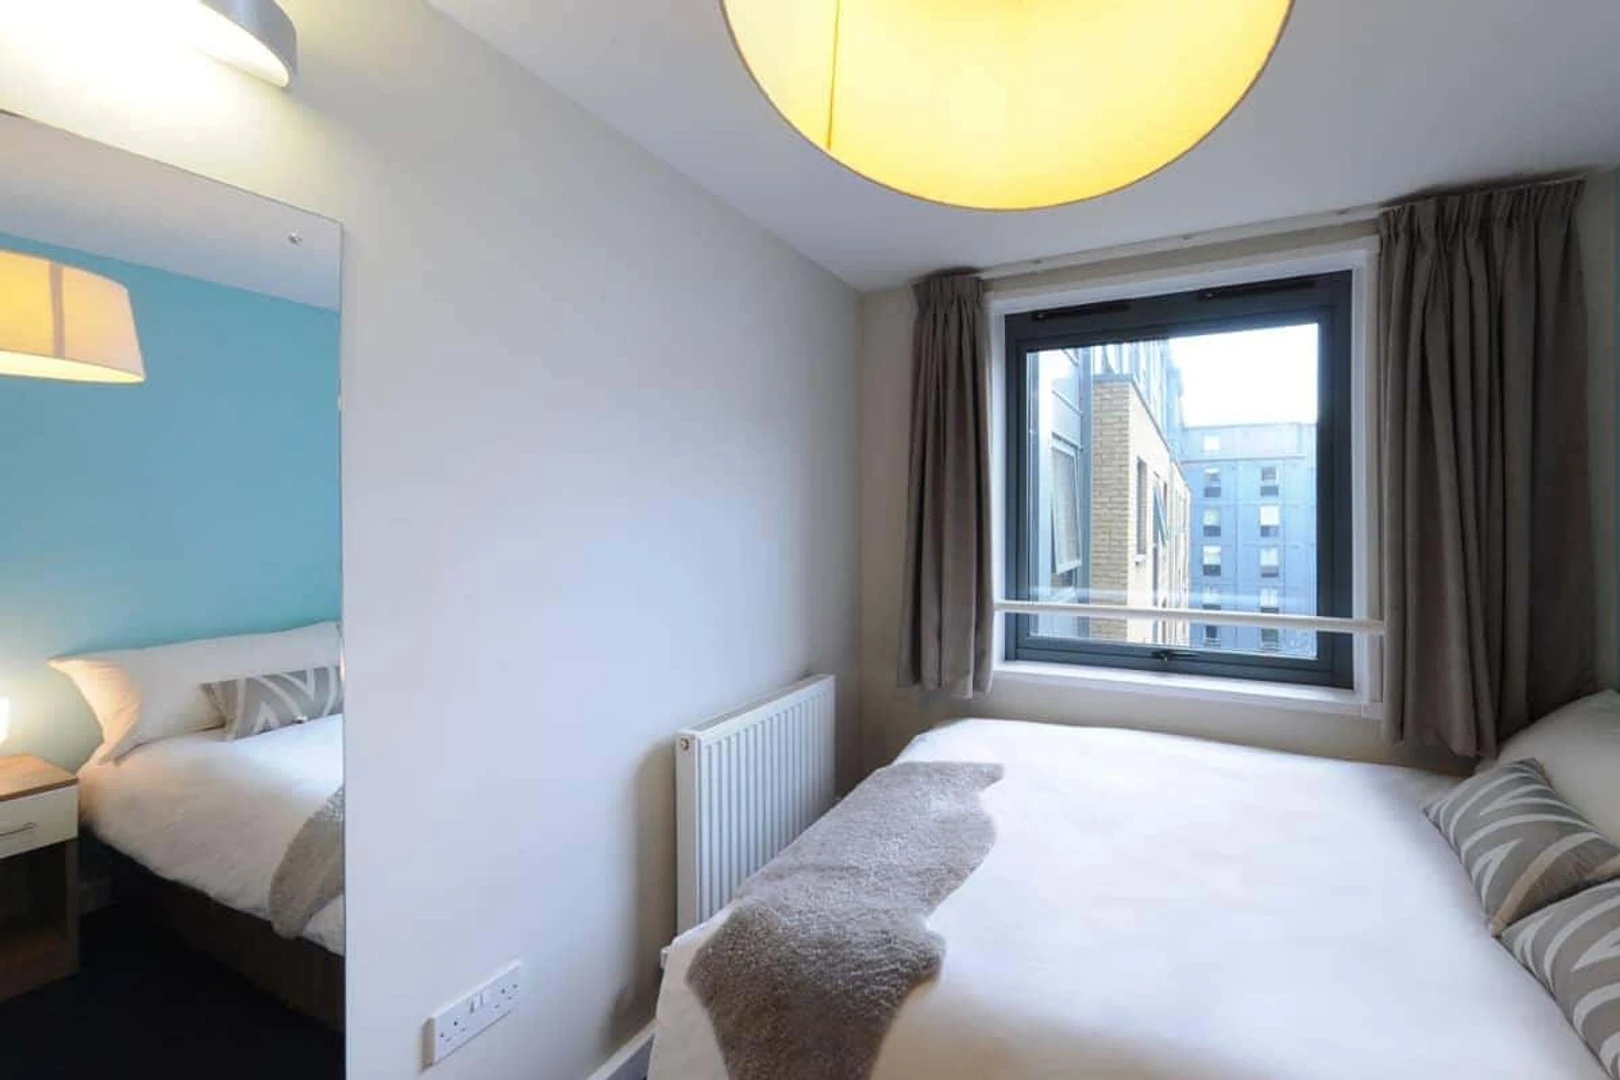 Cheap private room in City Of Westminster